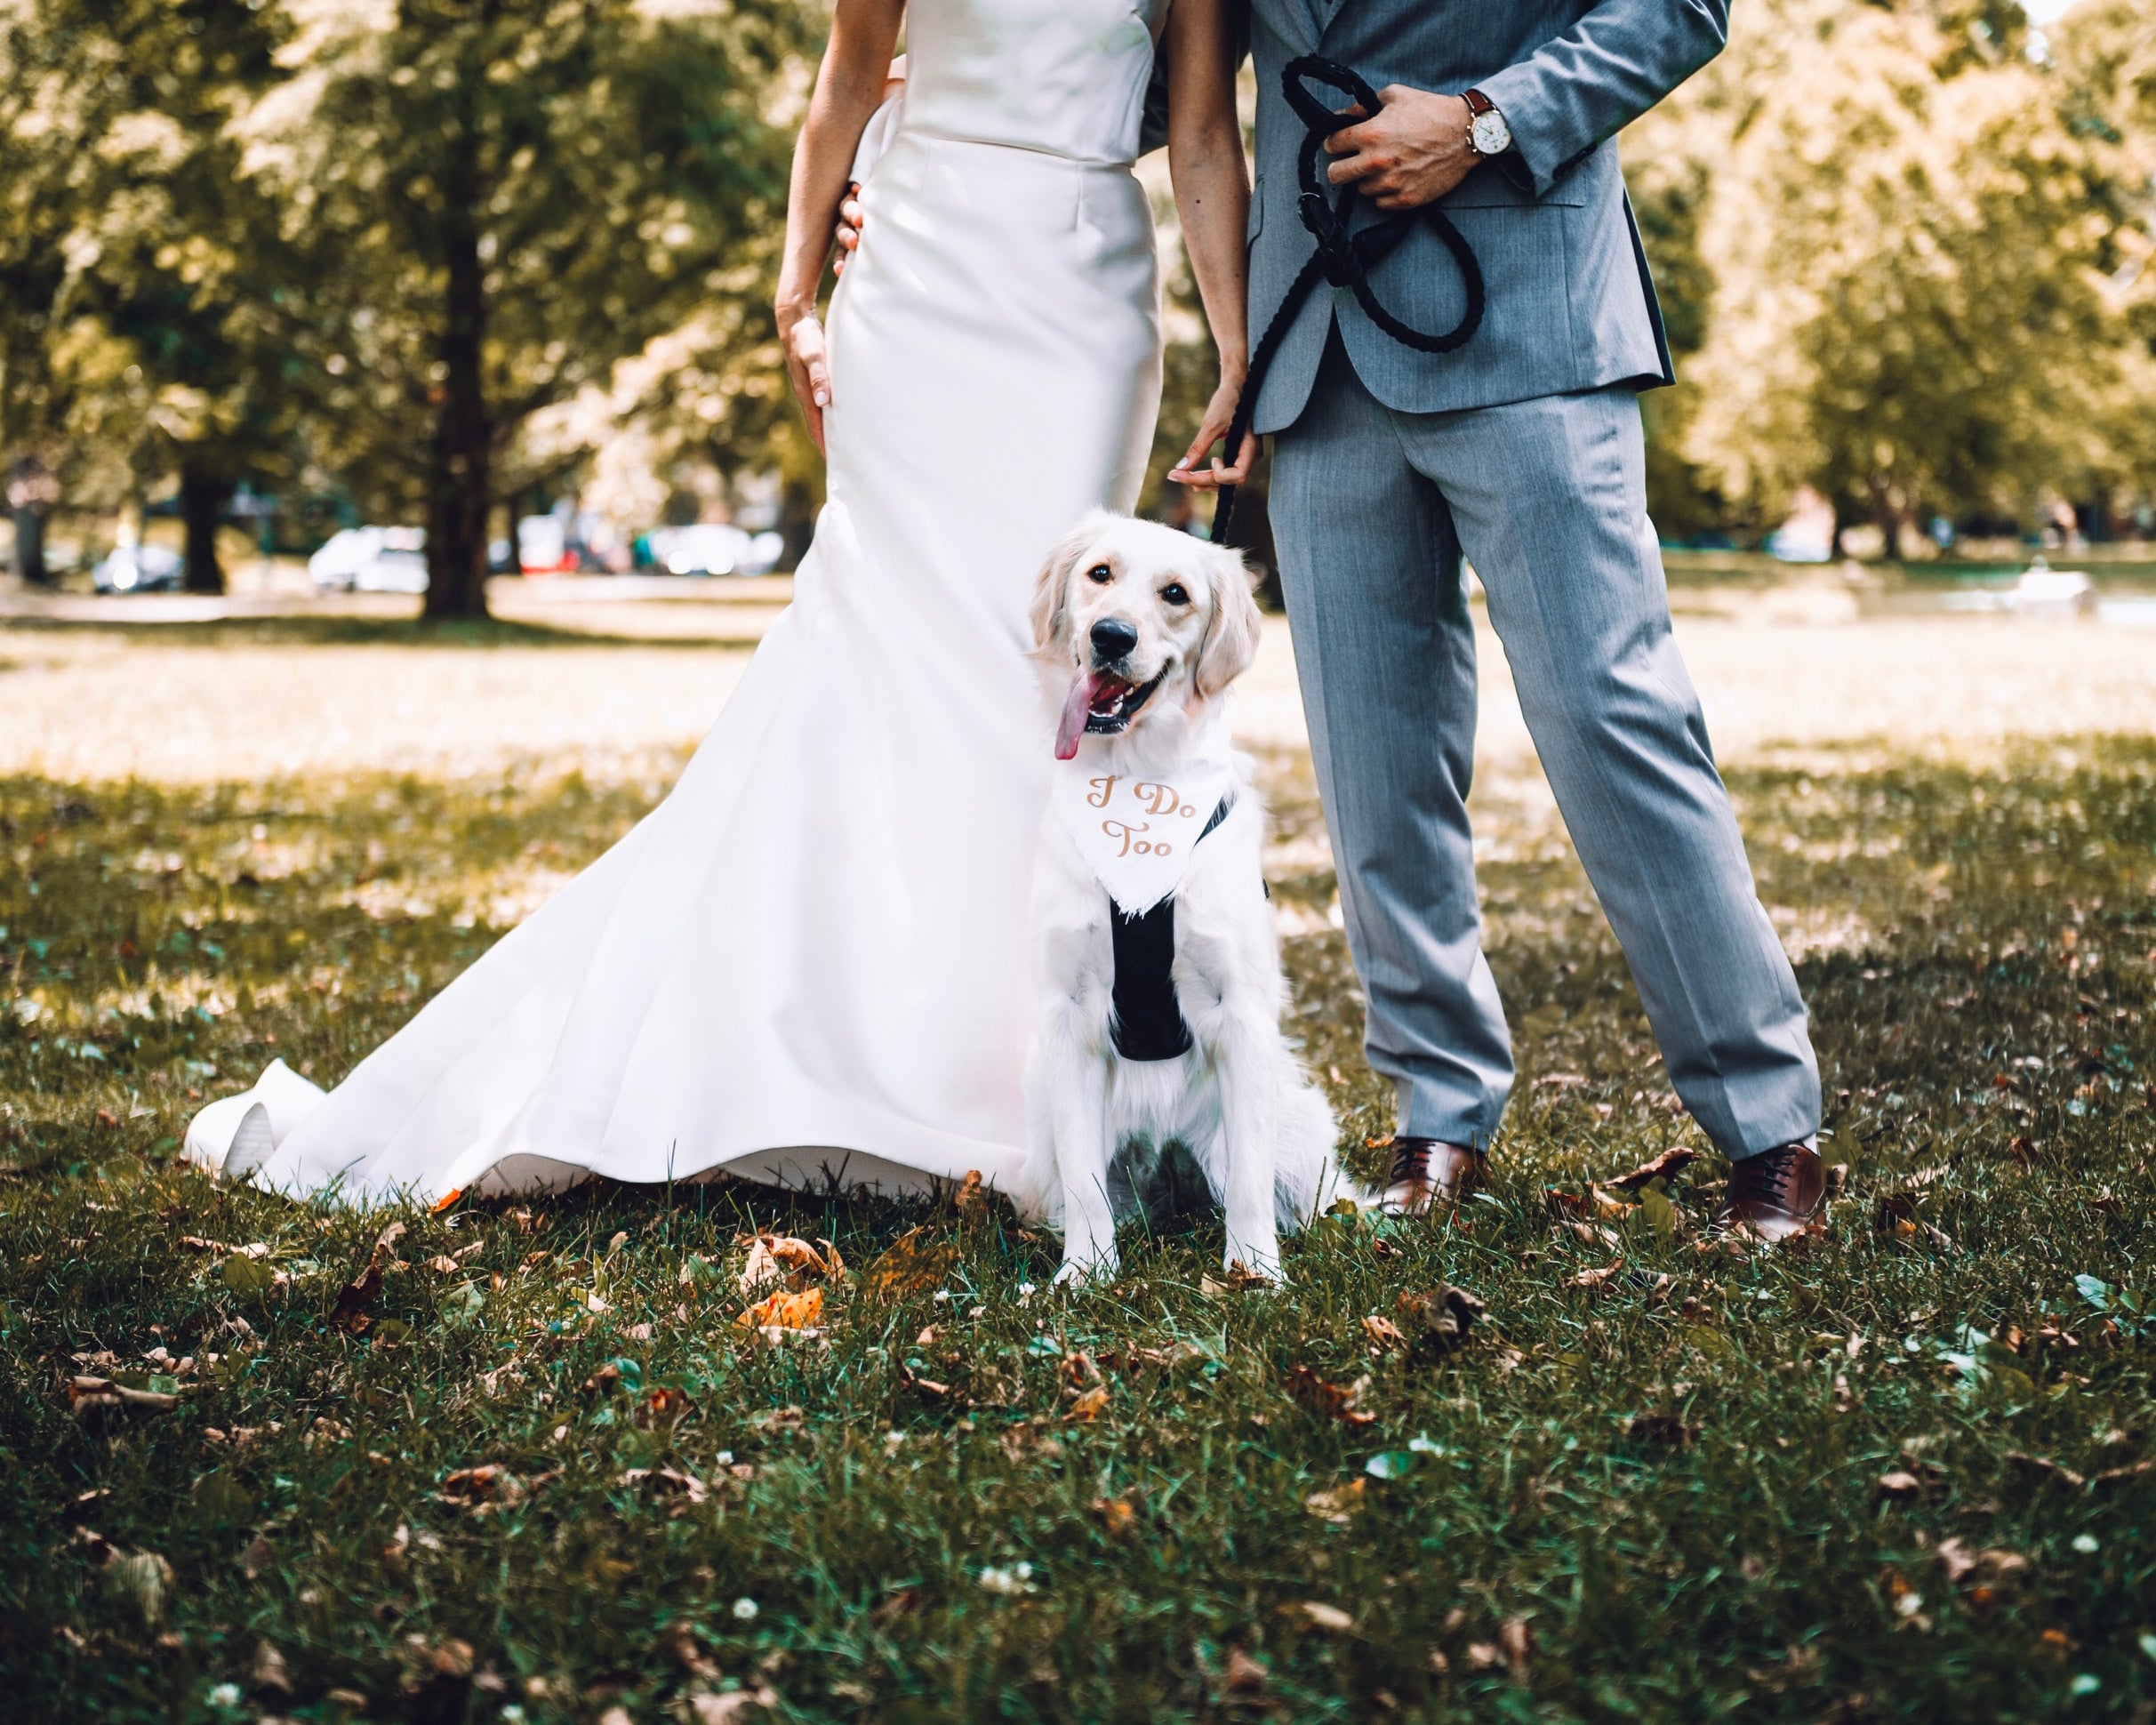 bride and groom on wedding day holding their puppy on a leash